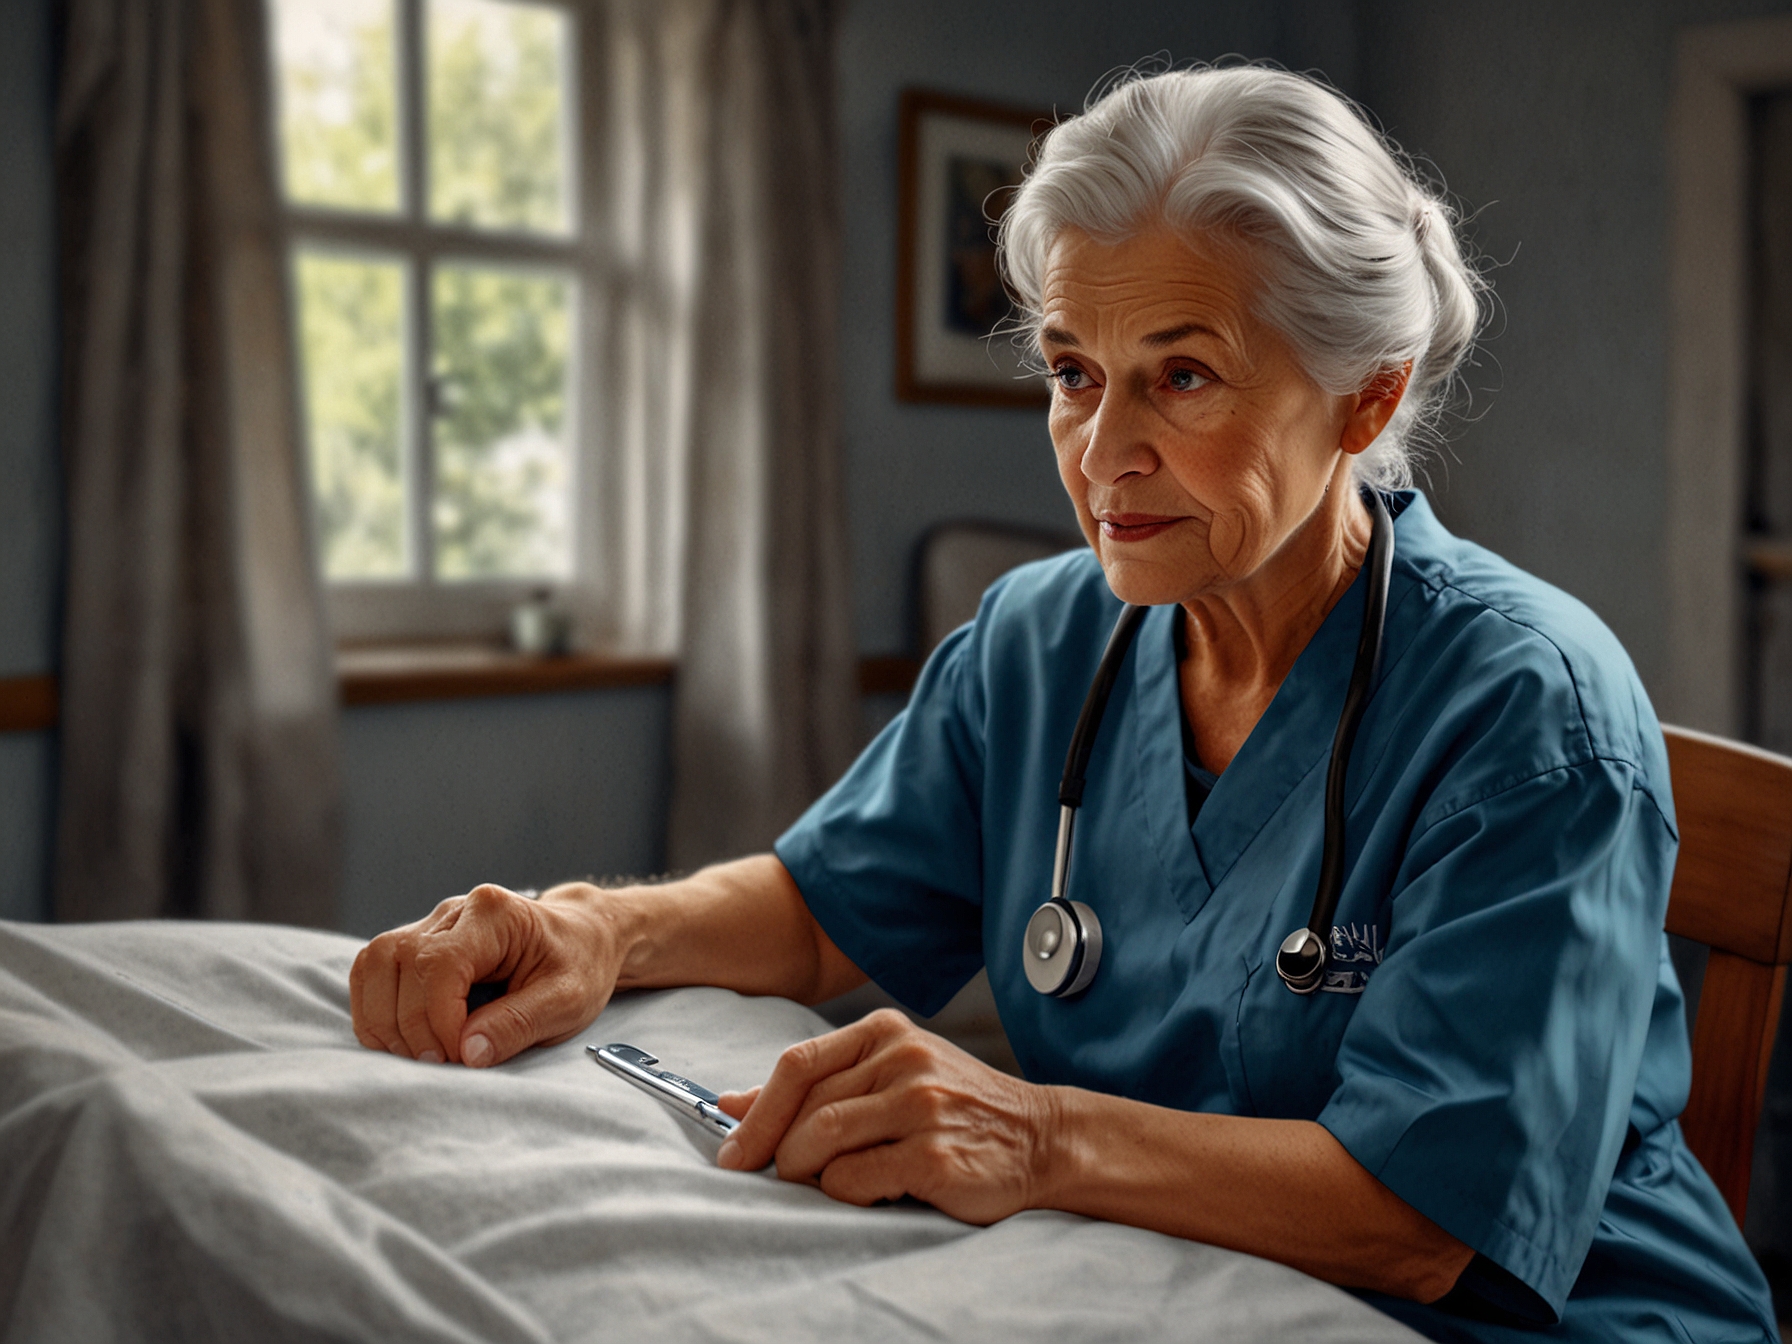 A nurse caring for an elderly patient, symbolizing the need for compassionate and ethical healthcare amidst the rising costs and exploitative practices in elderly medical care.